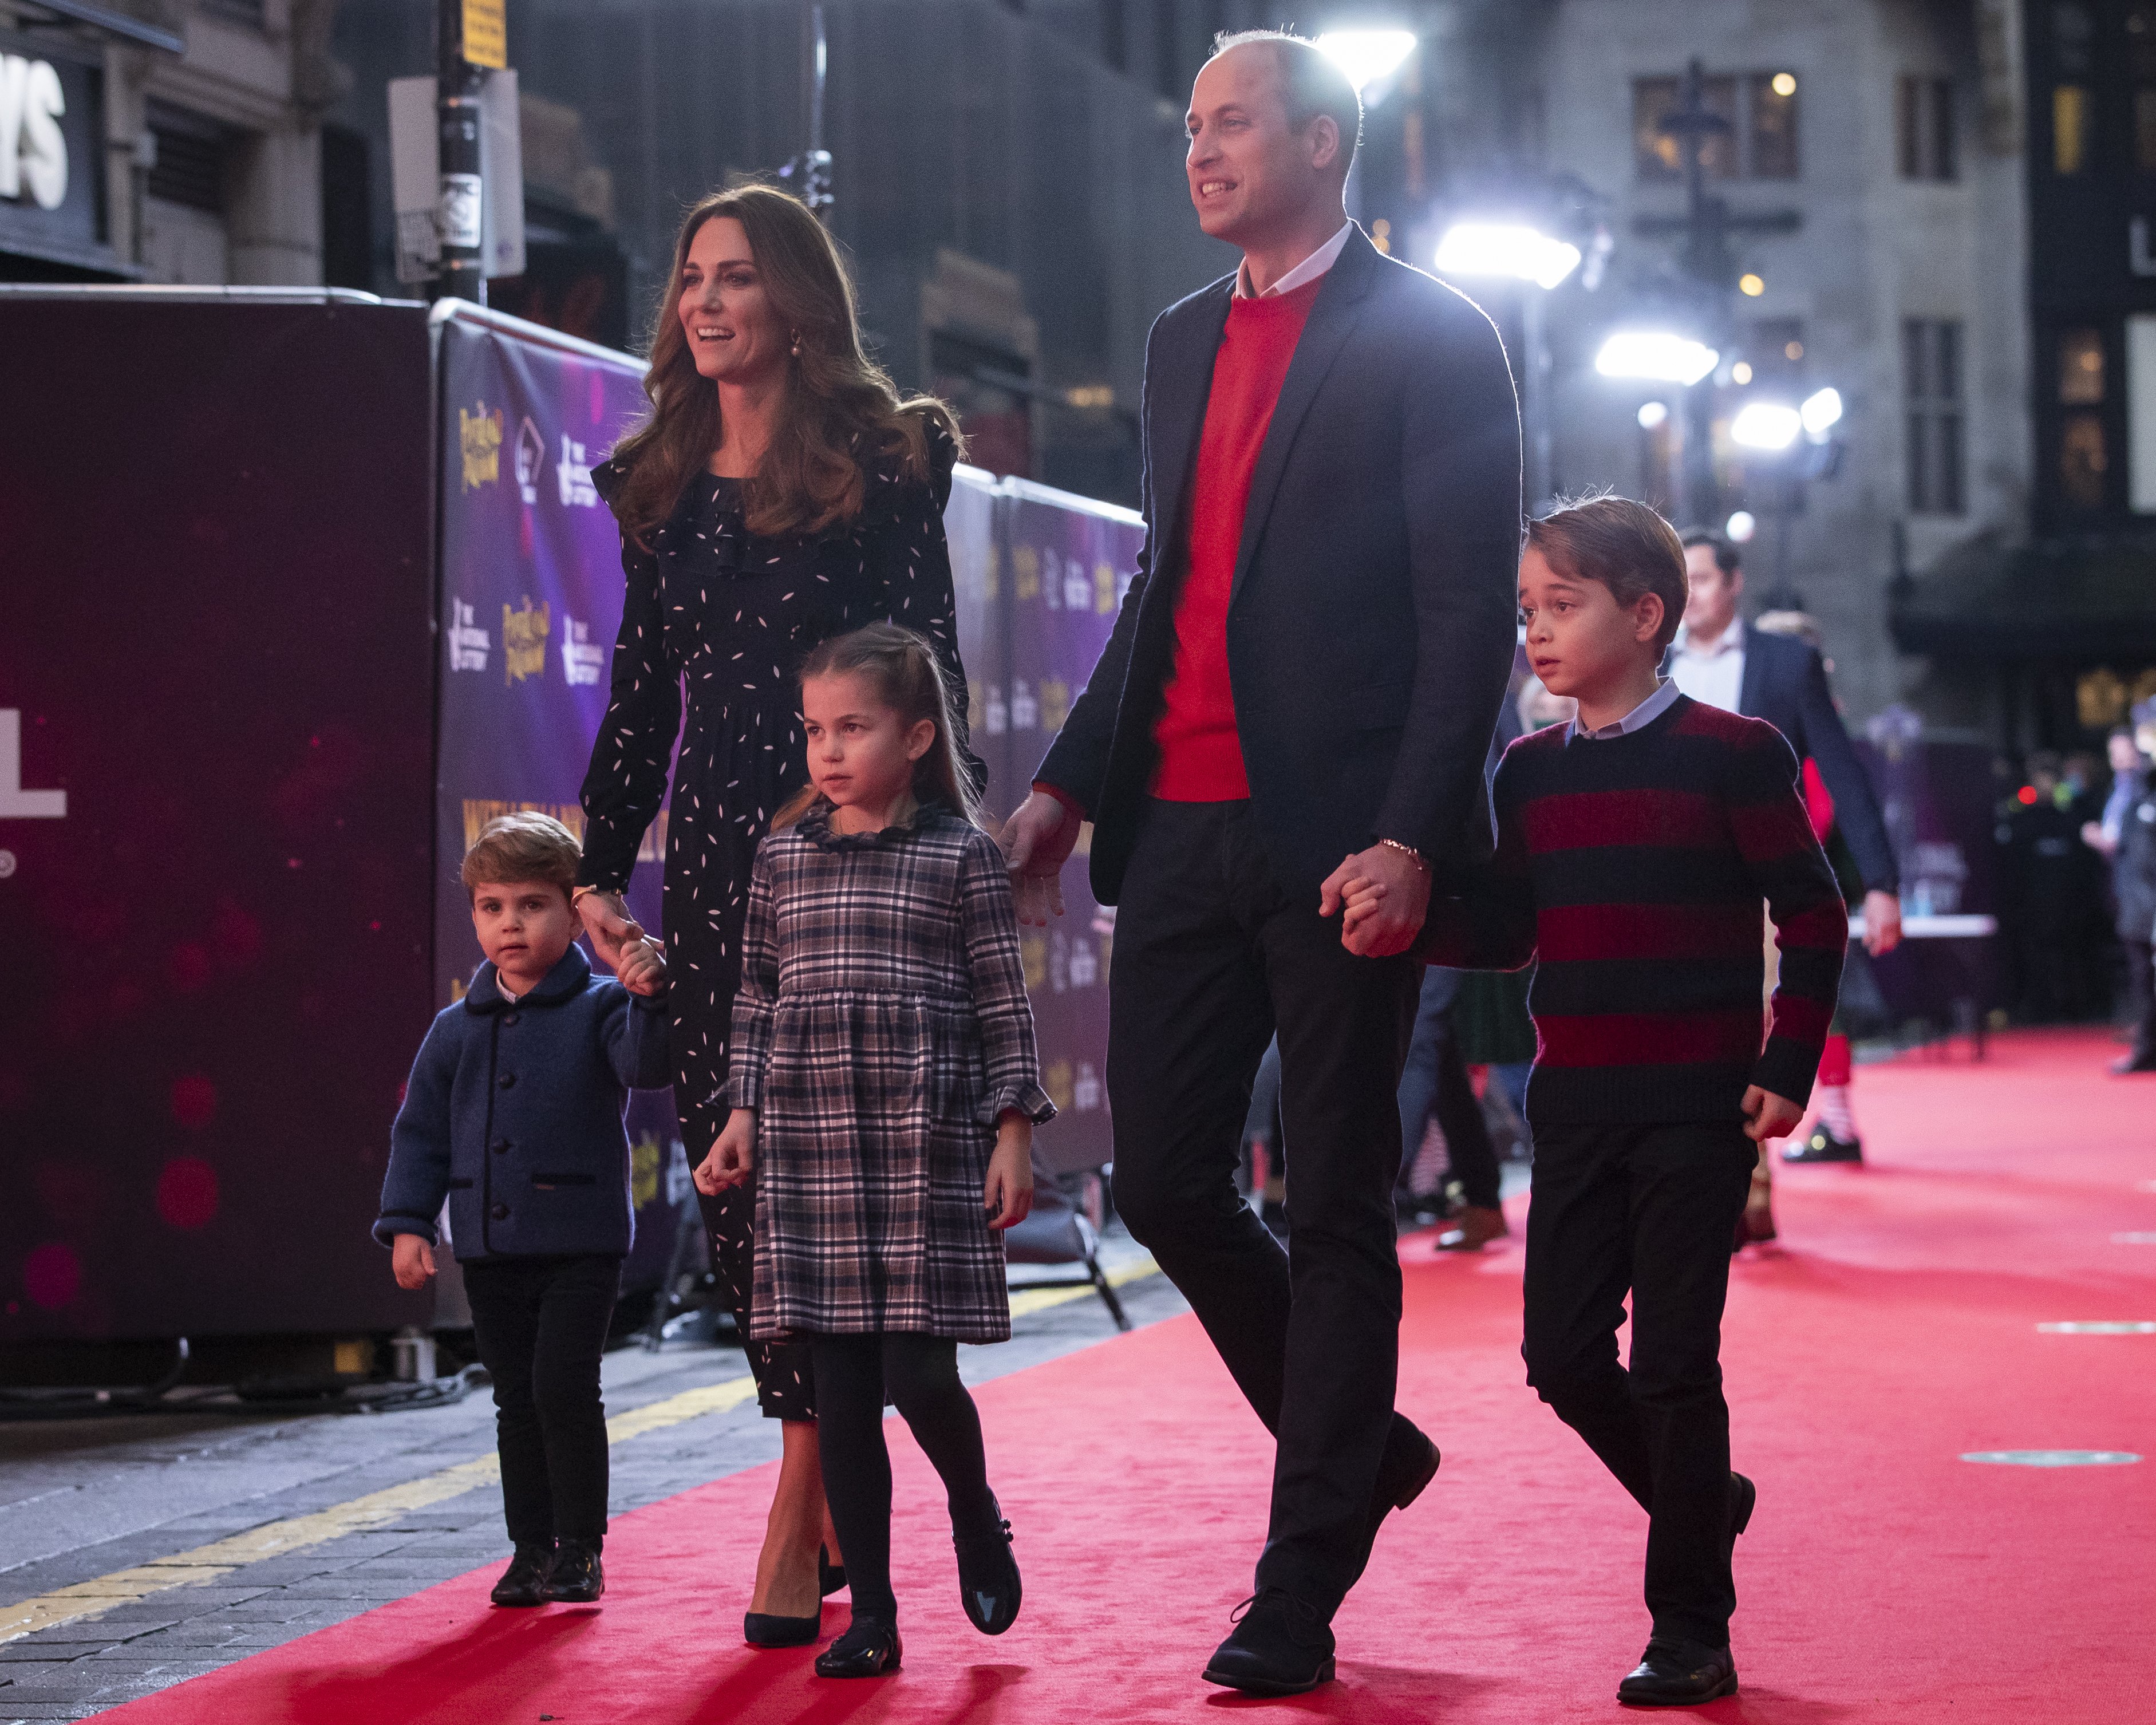  Prince William and Kate Middleton with their children, Prince Louis, Princess Charlotte and Prince George, at London's Palladium Theatre, on December 11, 2020 in London, England | Photo: Getty Images